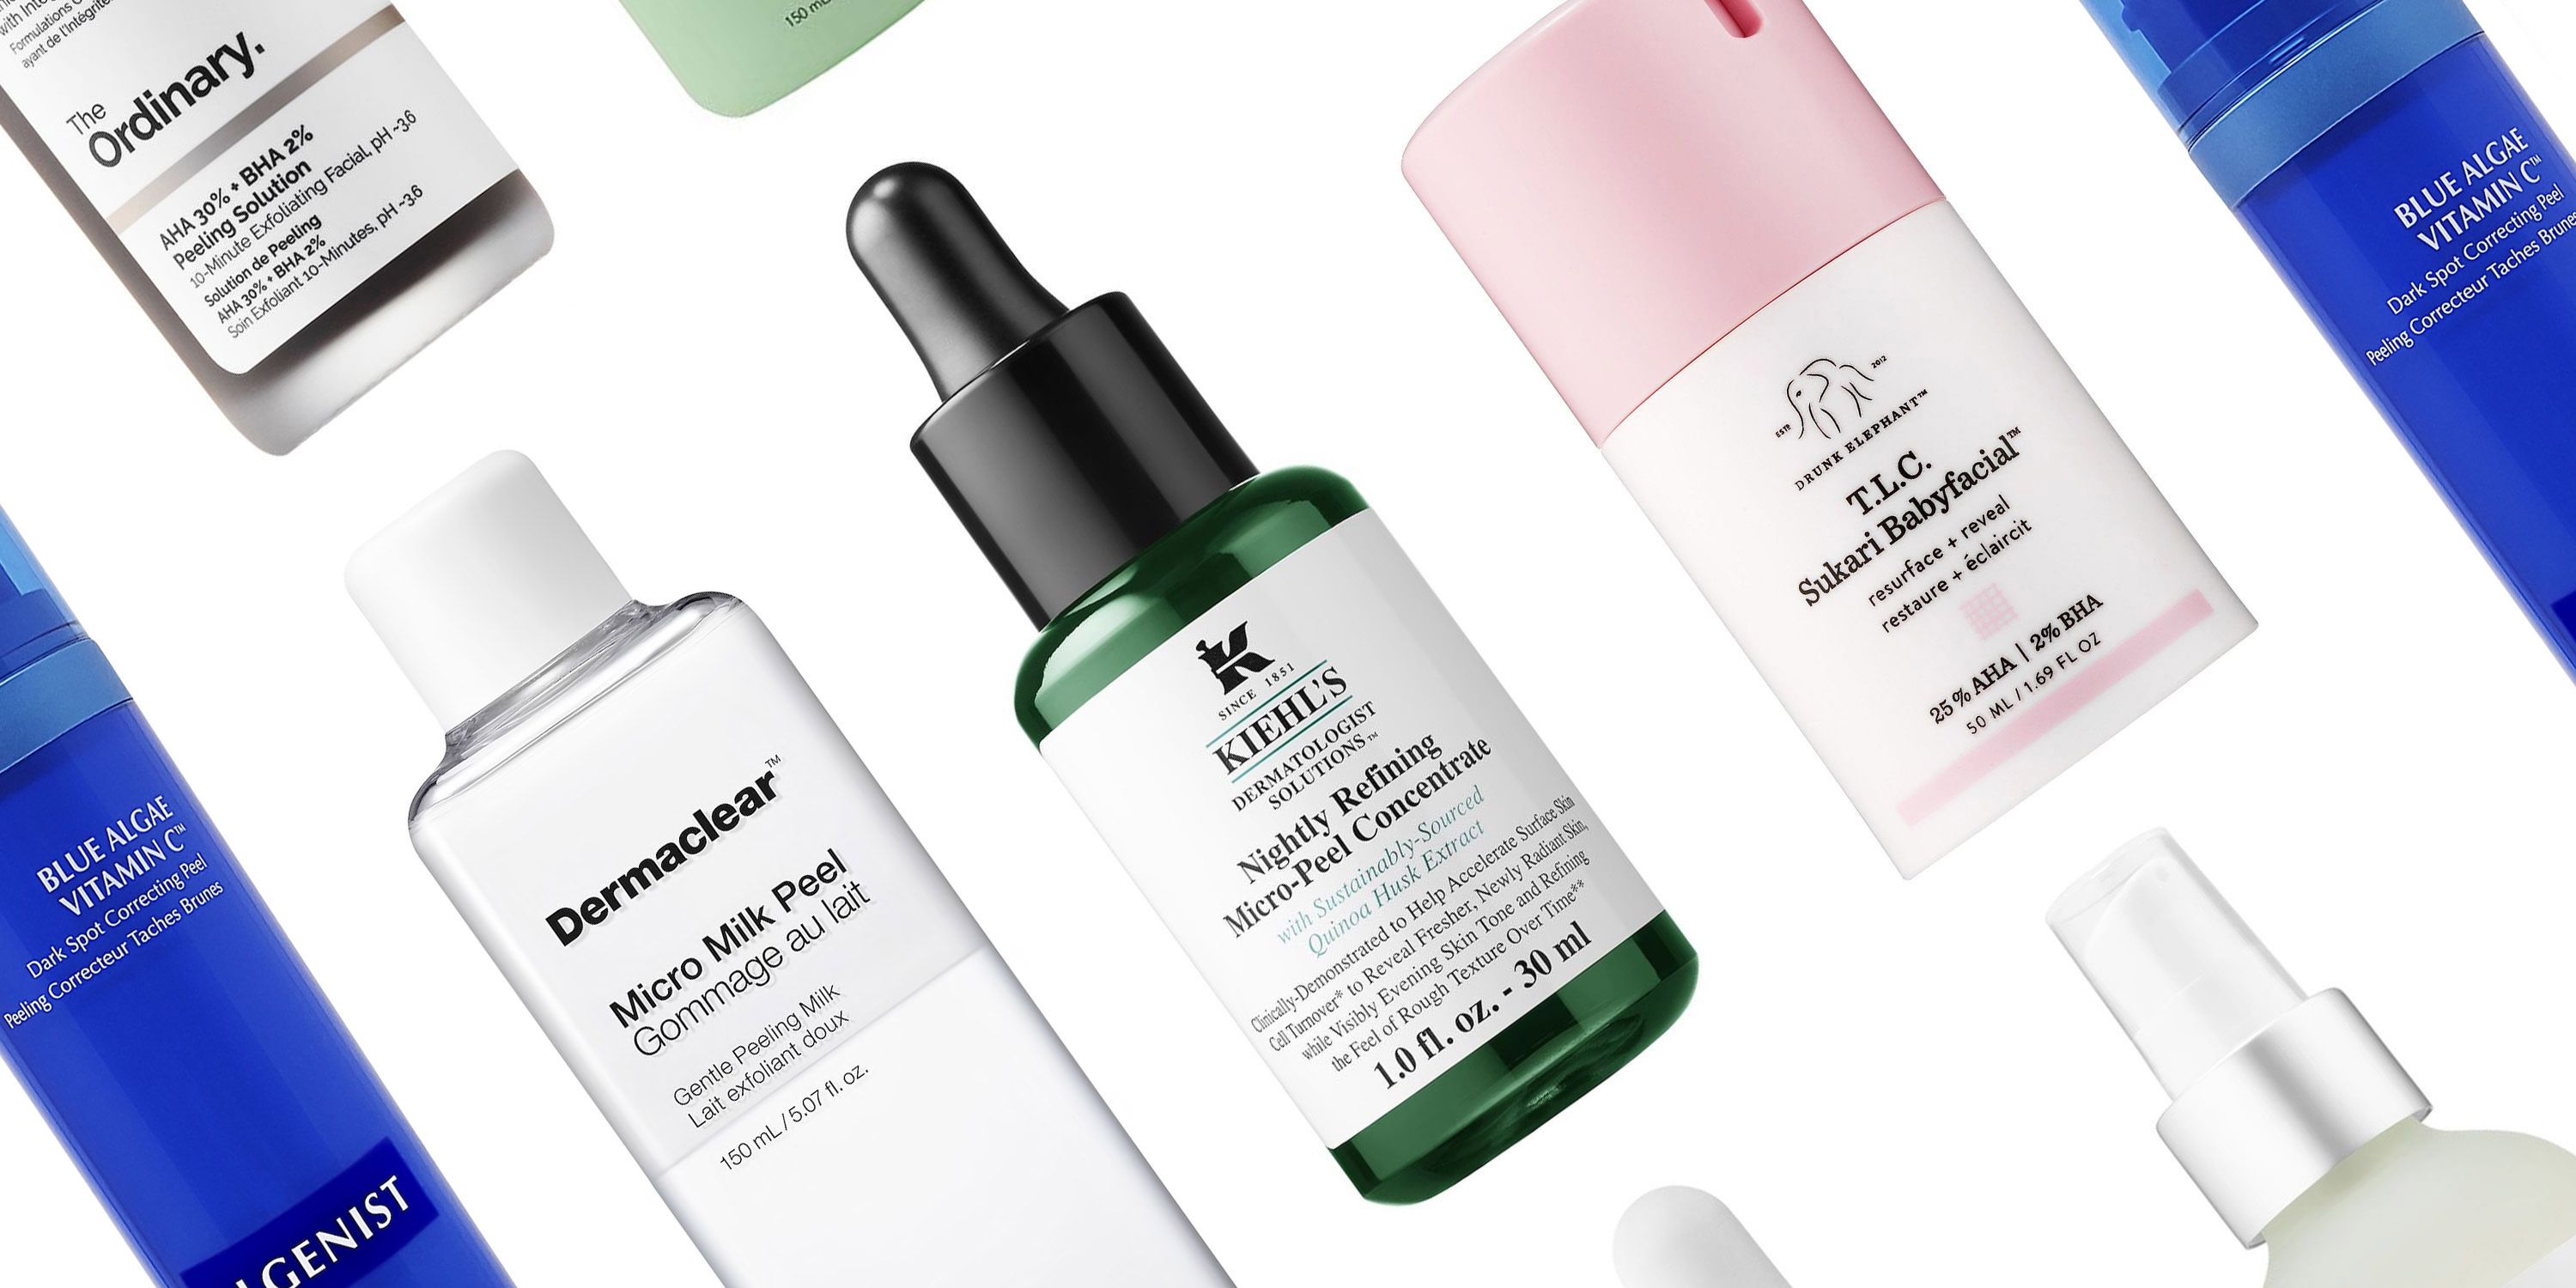 17 Best Chemical Face Peels For New Serums And Masks For An At Home Face Peel